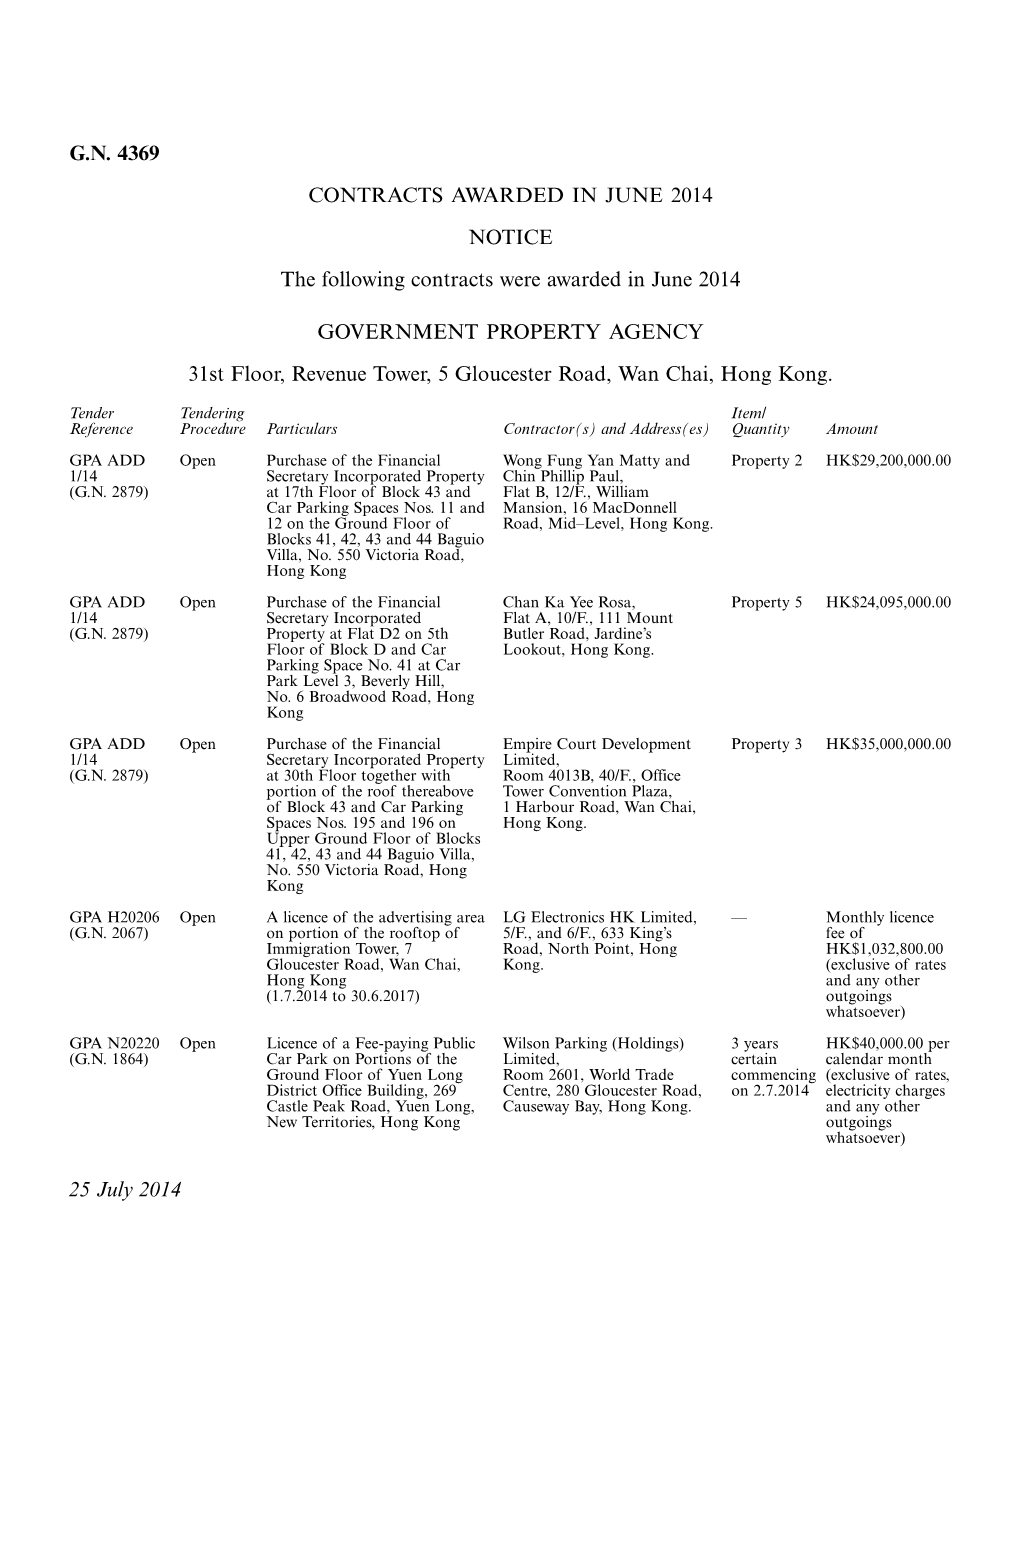 G.N. 4369 CONTRACTS AWARDED in JUNE 2014 NOTICE the Following Contracts Were Awarded in June 2014 GOVERNMENT PROPERTY AGENCY